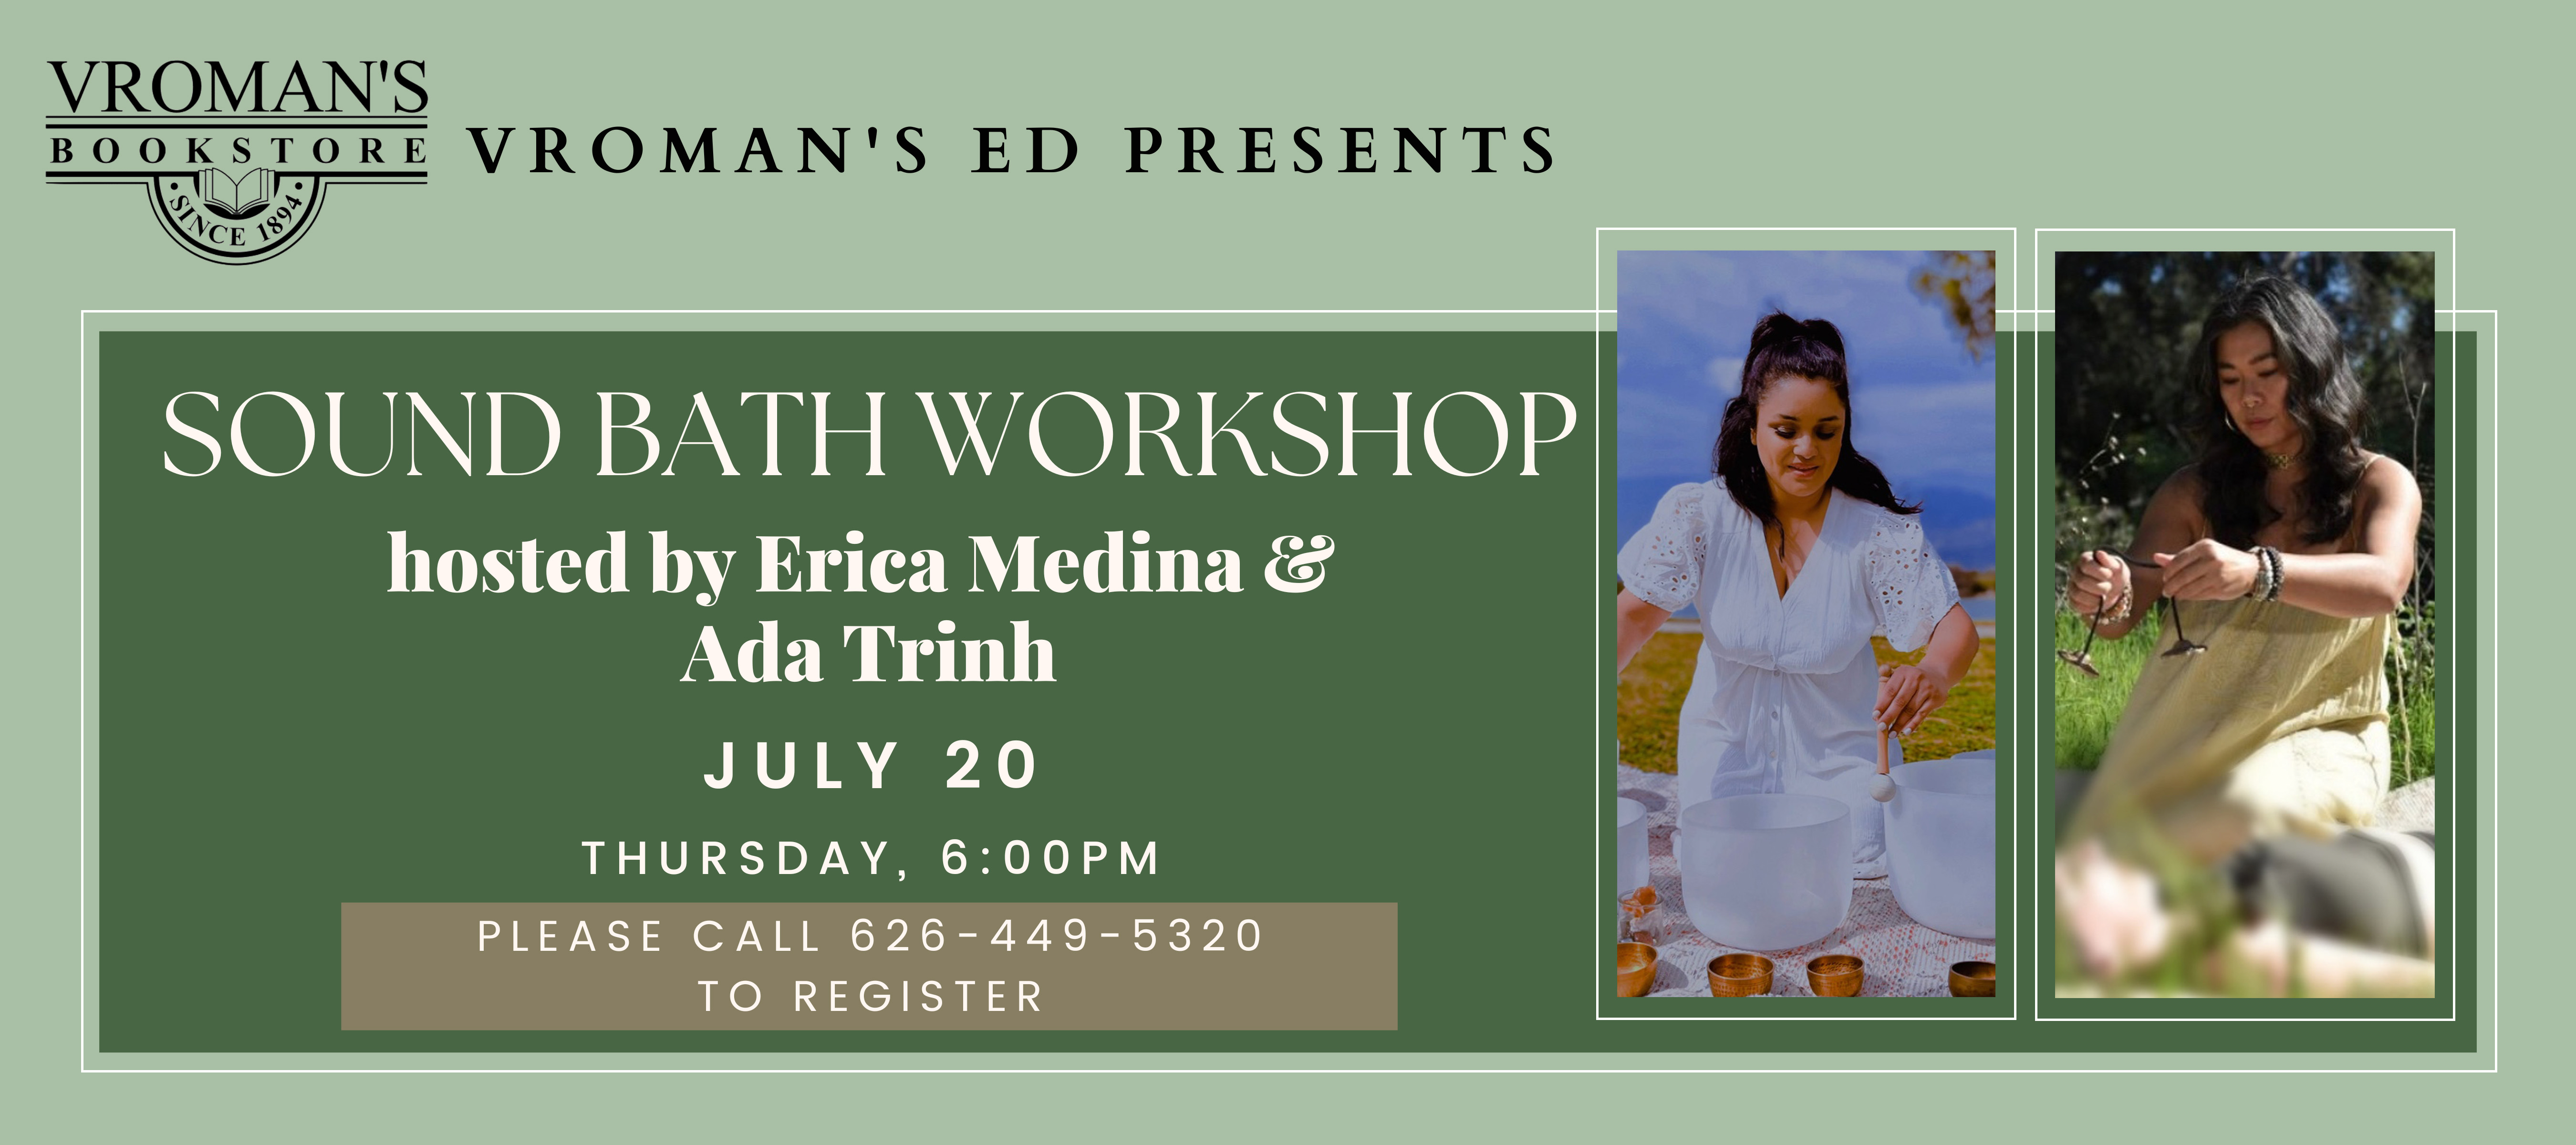 Sound Bath workshop details for Vroman's Ed class July 20th at 6pm